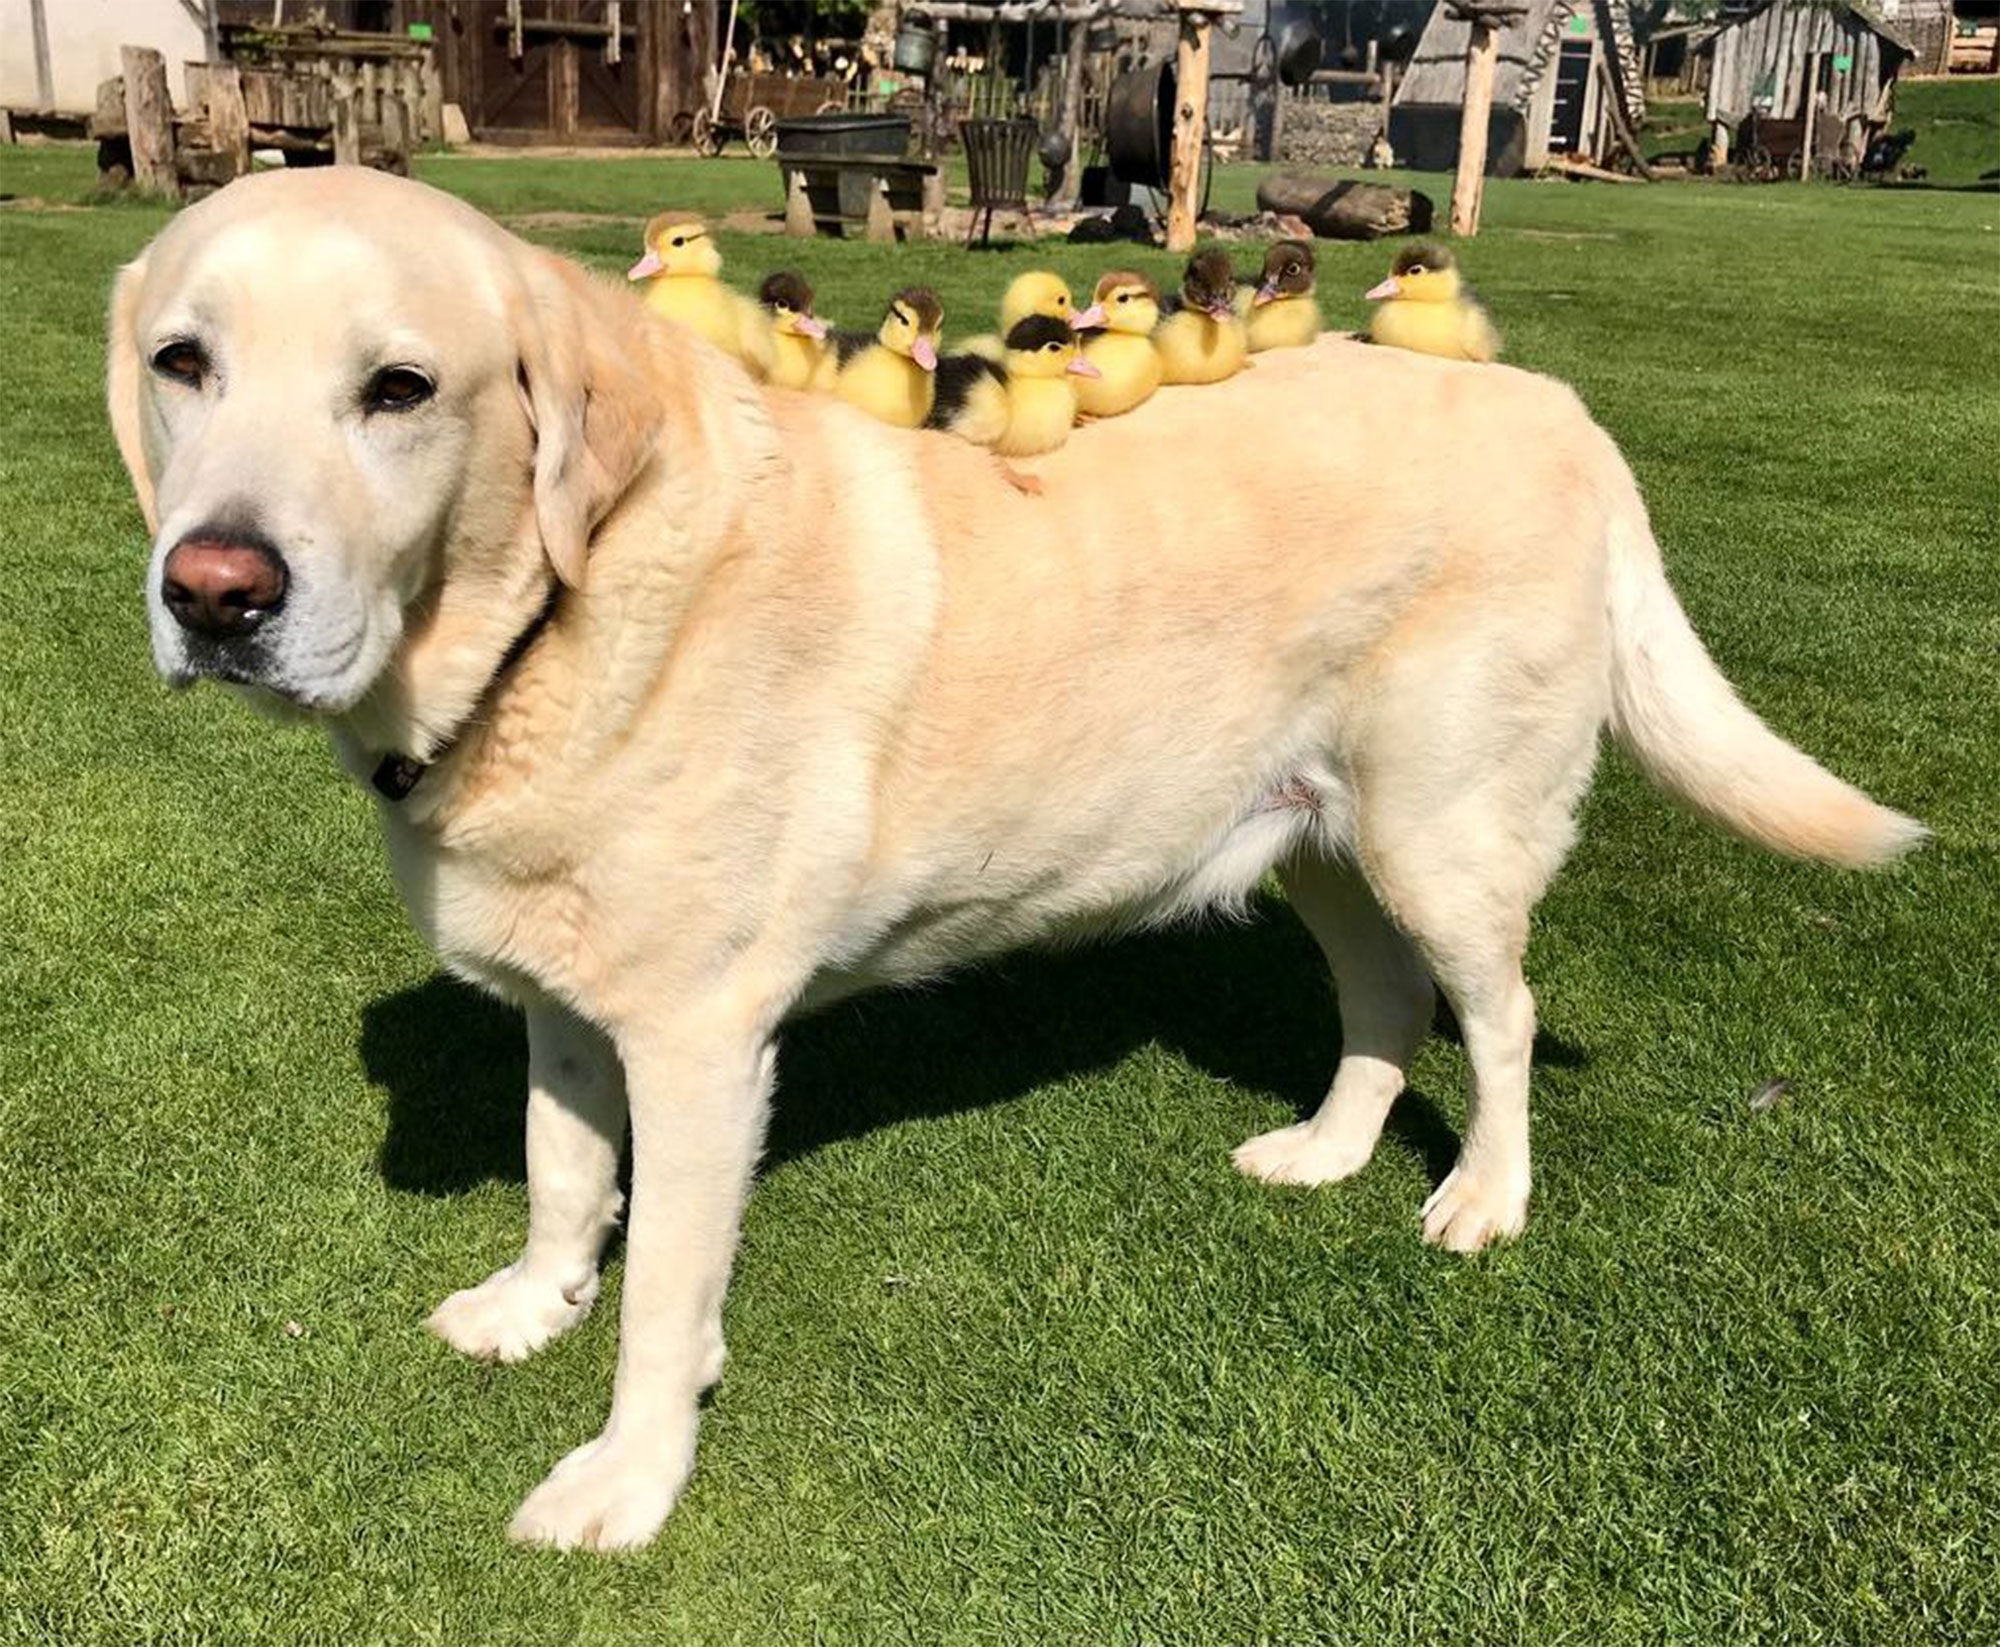 Dog Adopts Ducklings in Essex, Photos | PEOPLE.com